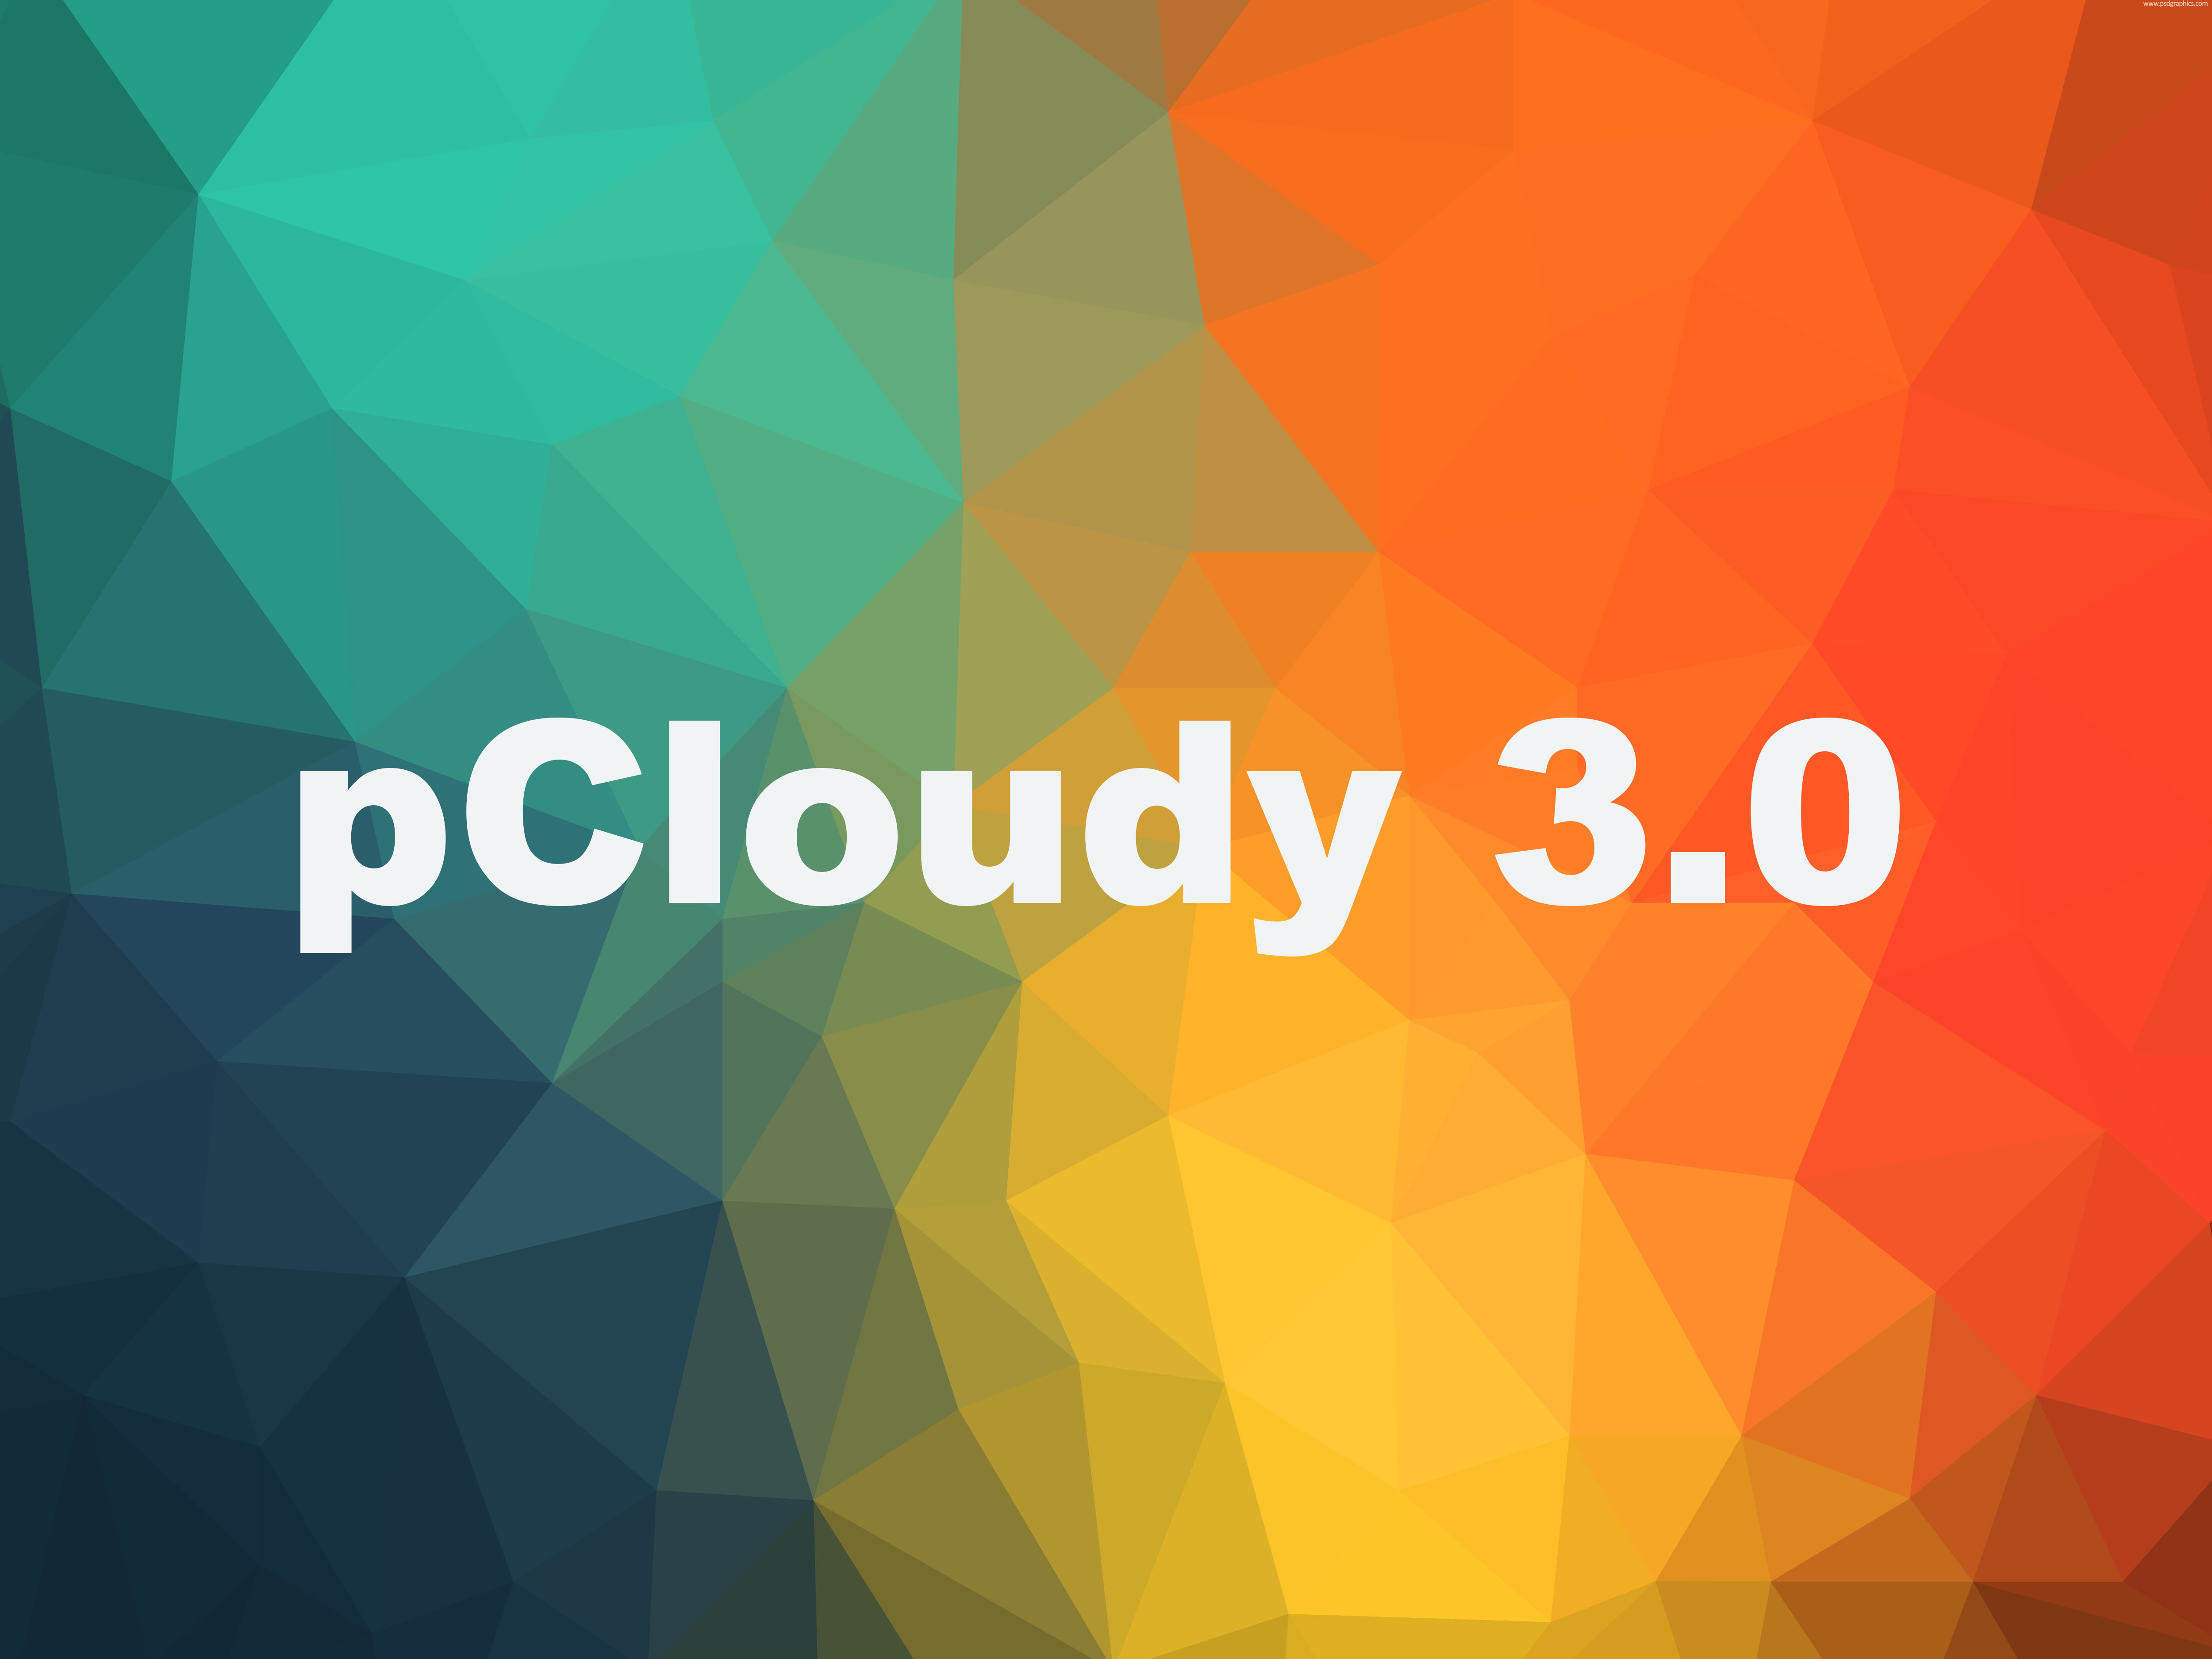 What’s New With pCloudy 3.0?